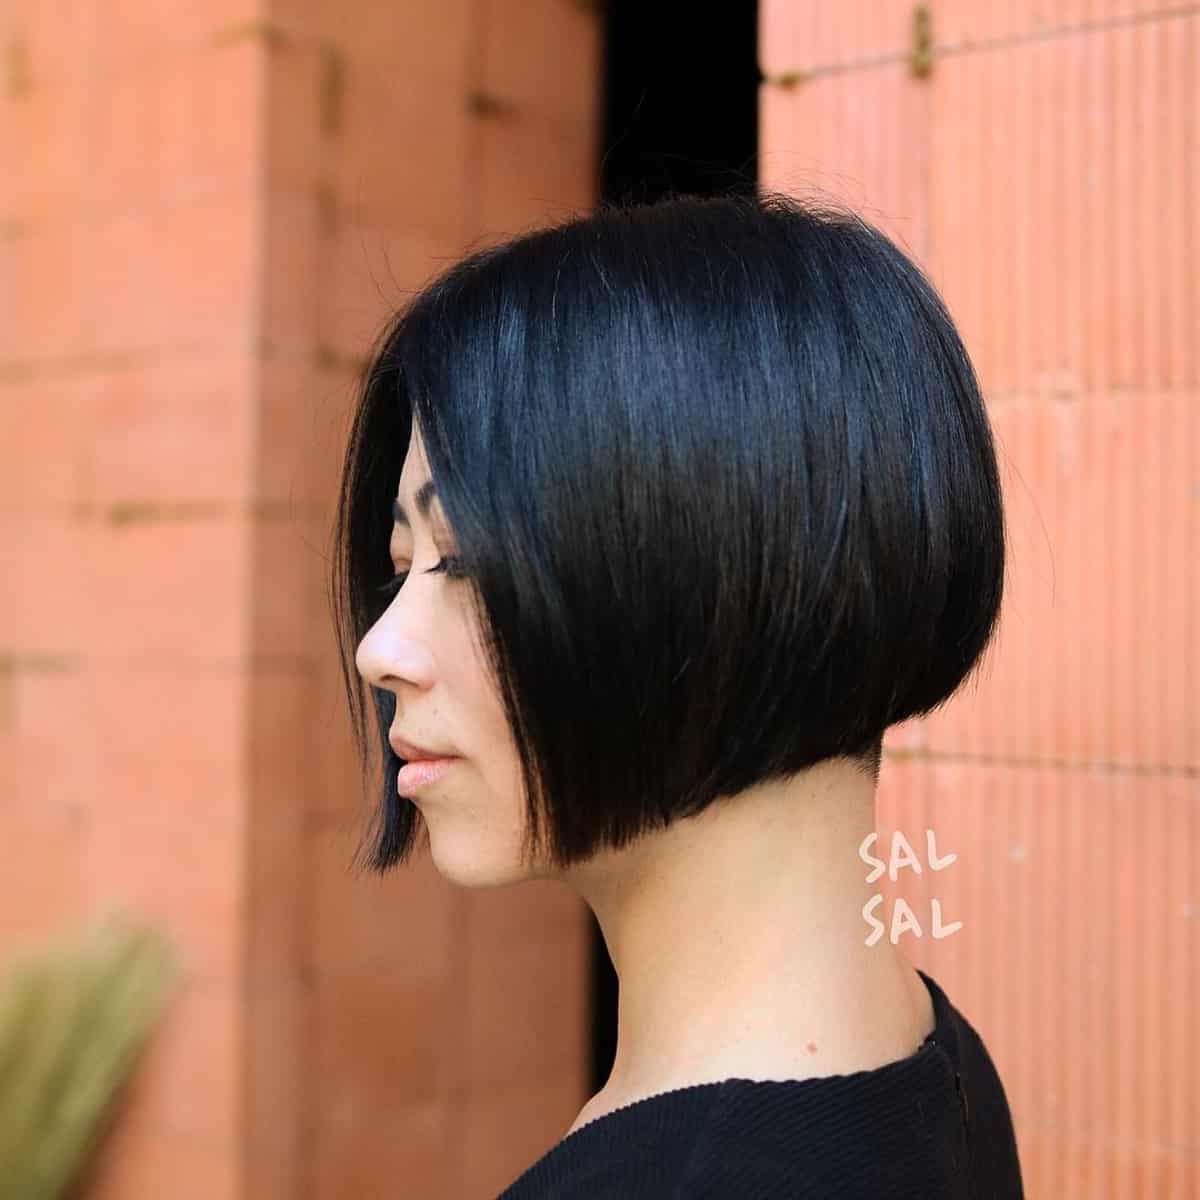 24 Best Short Blunt Bob Haircuts Ideas For Women of All Ages